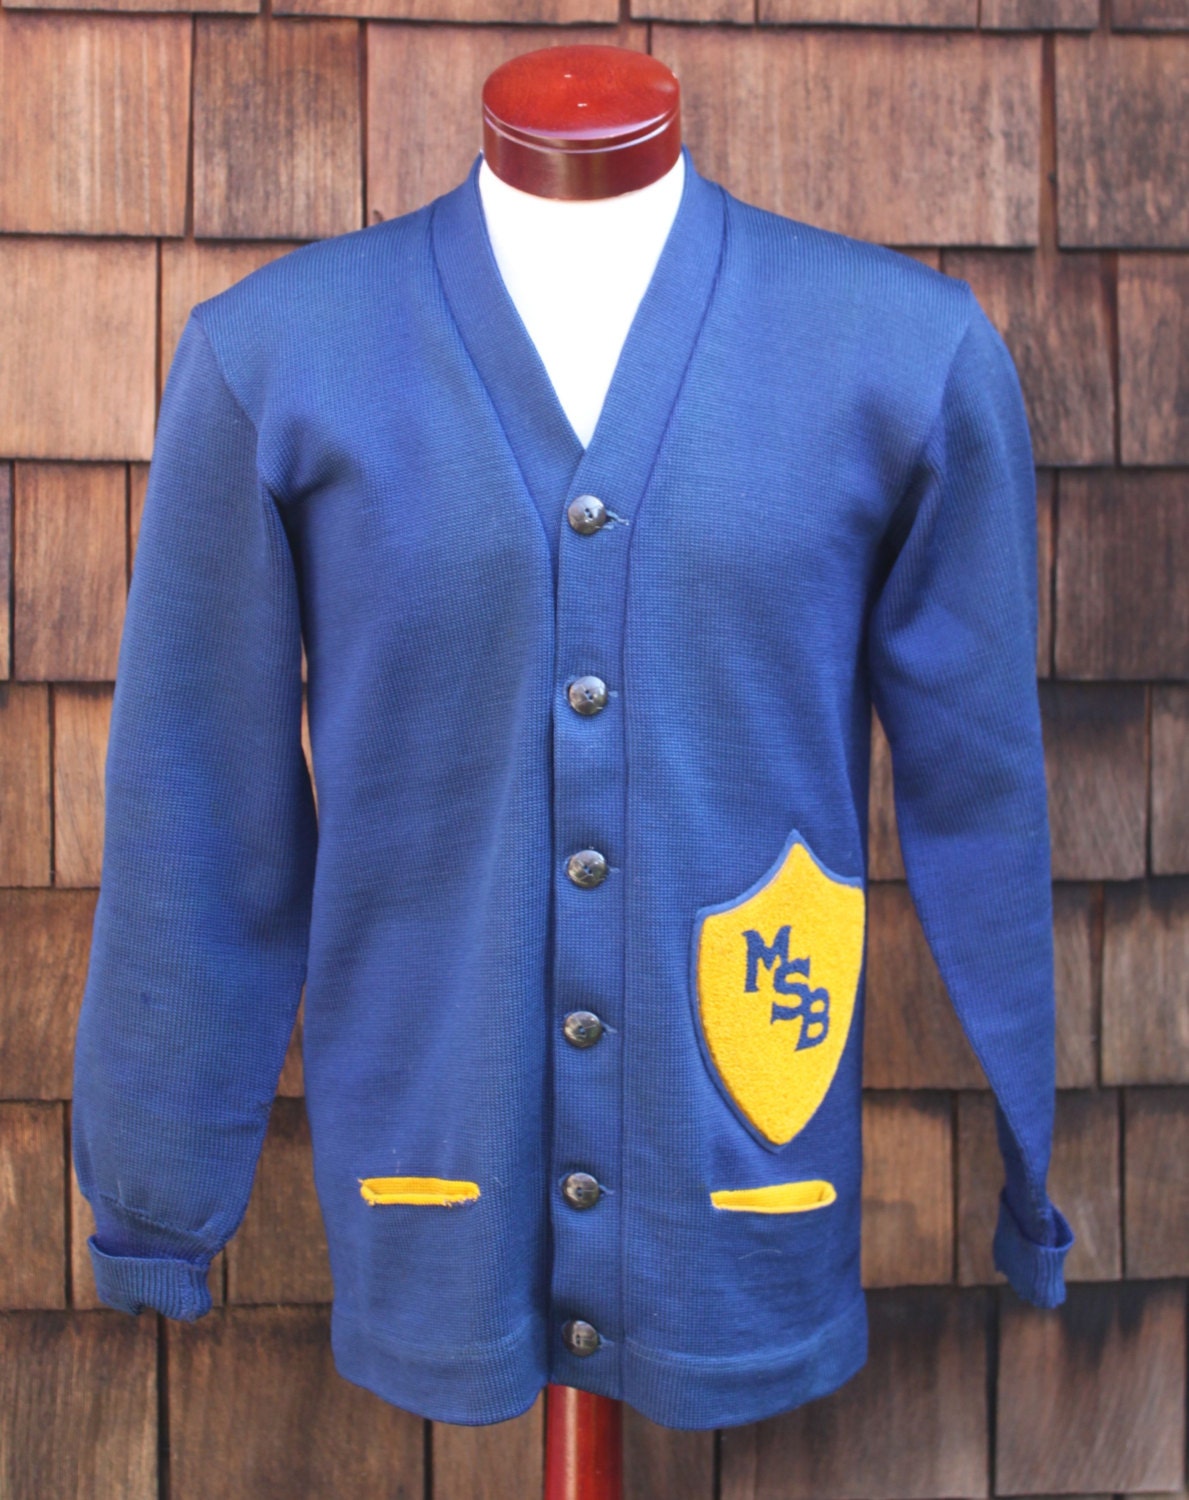 Items similar to 1950's Blue and Gold MSB Letterman Sweater on Etsy